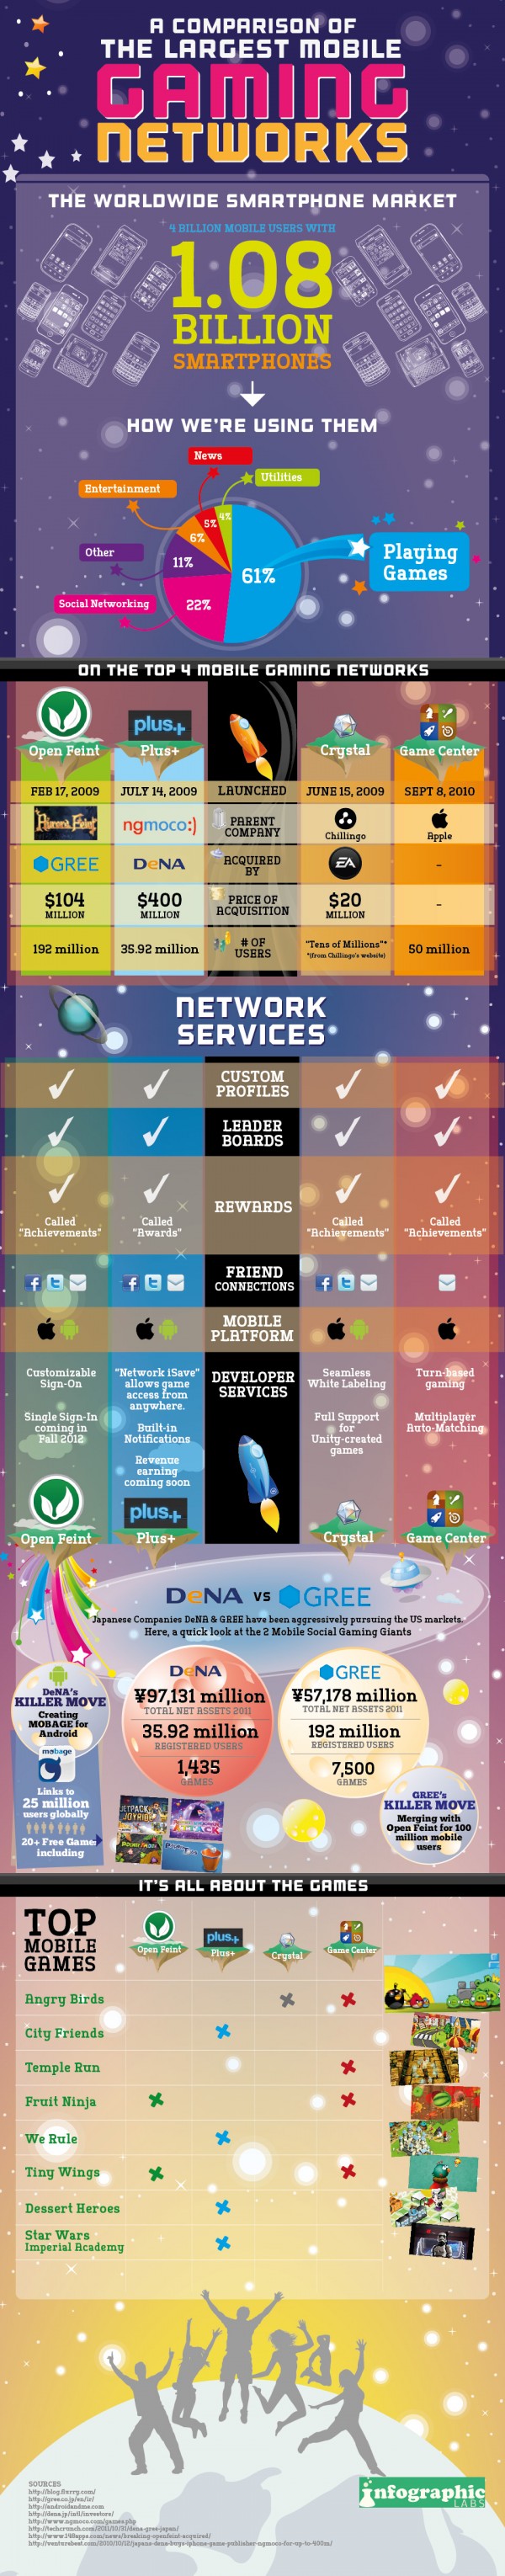 A comparison of the largest mobile Gaming Networks [Infographic].